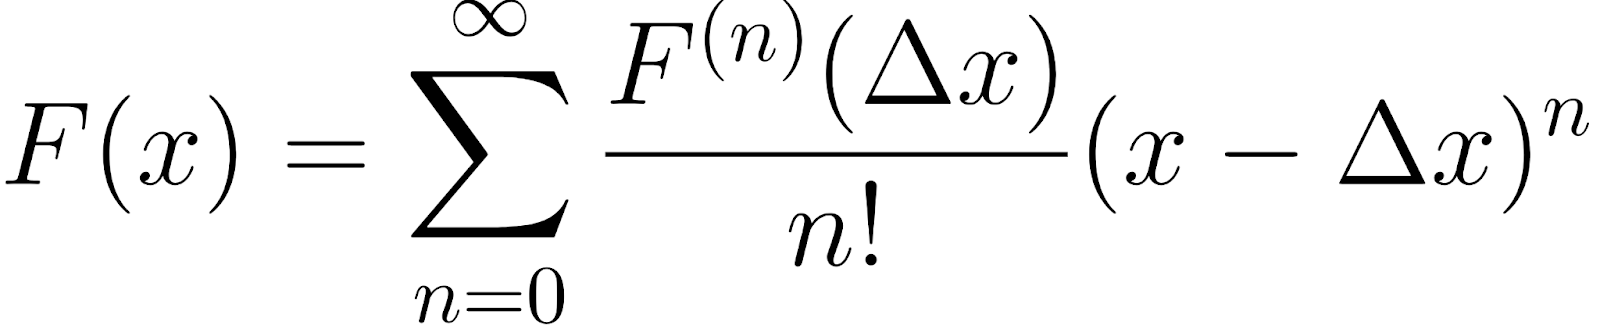 taylor series expansion